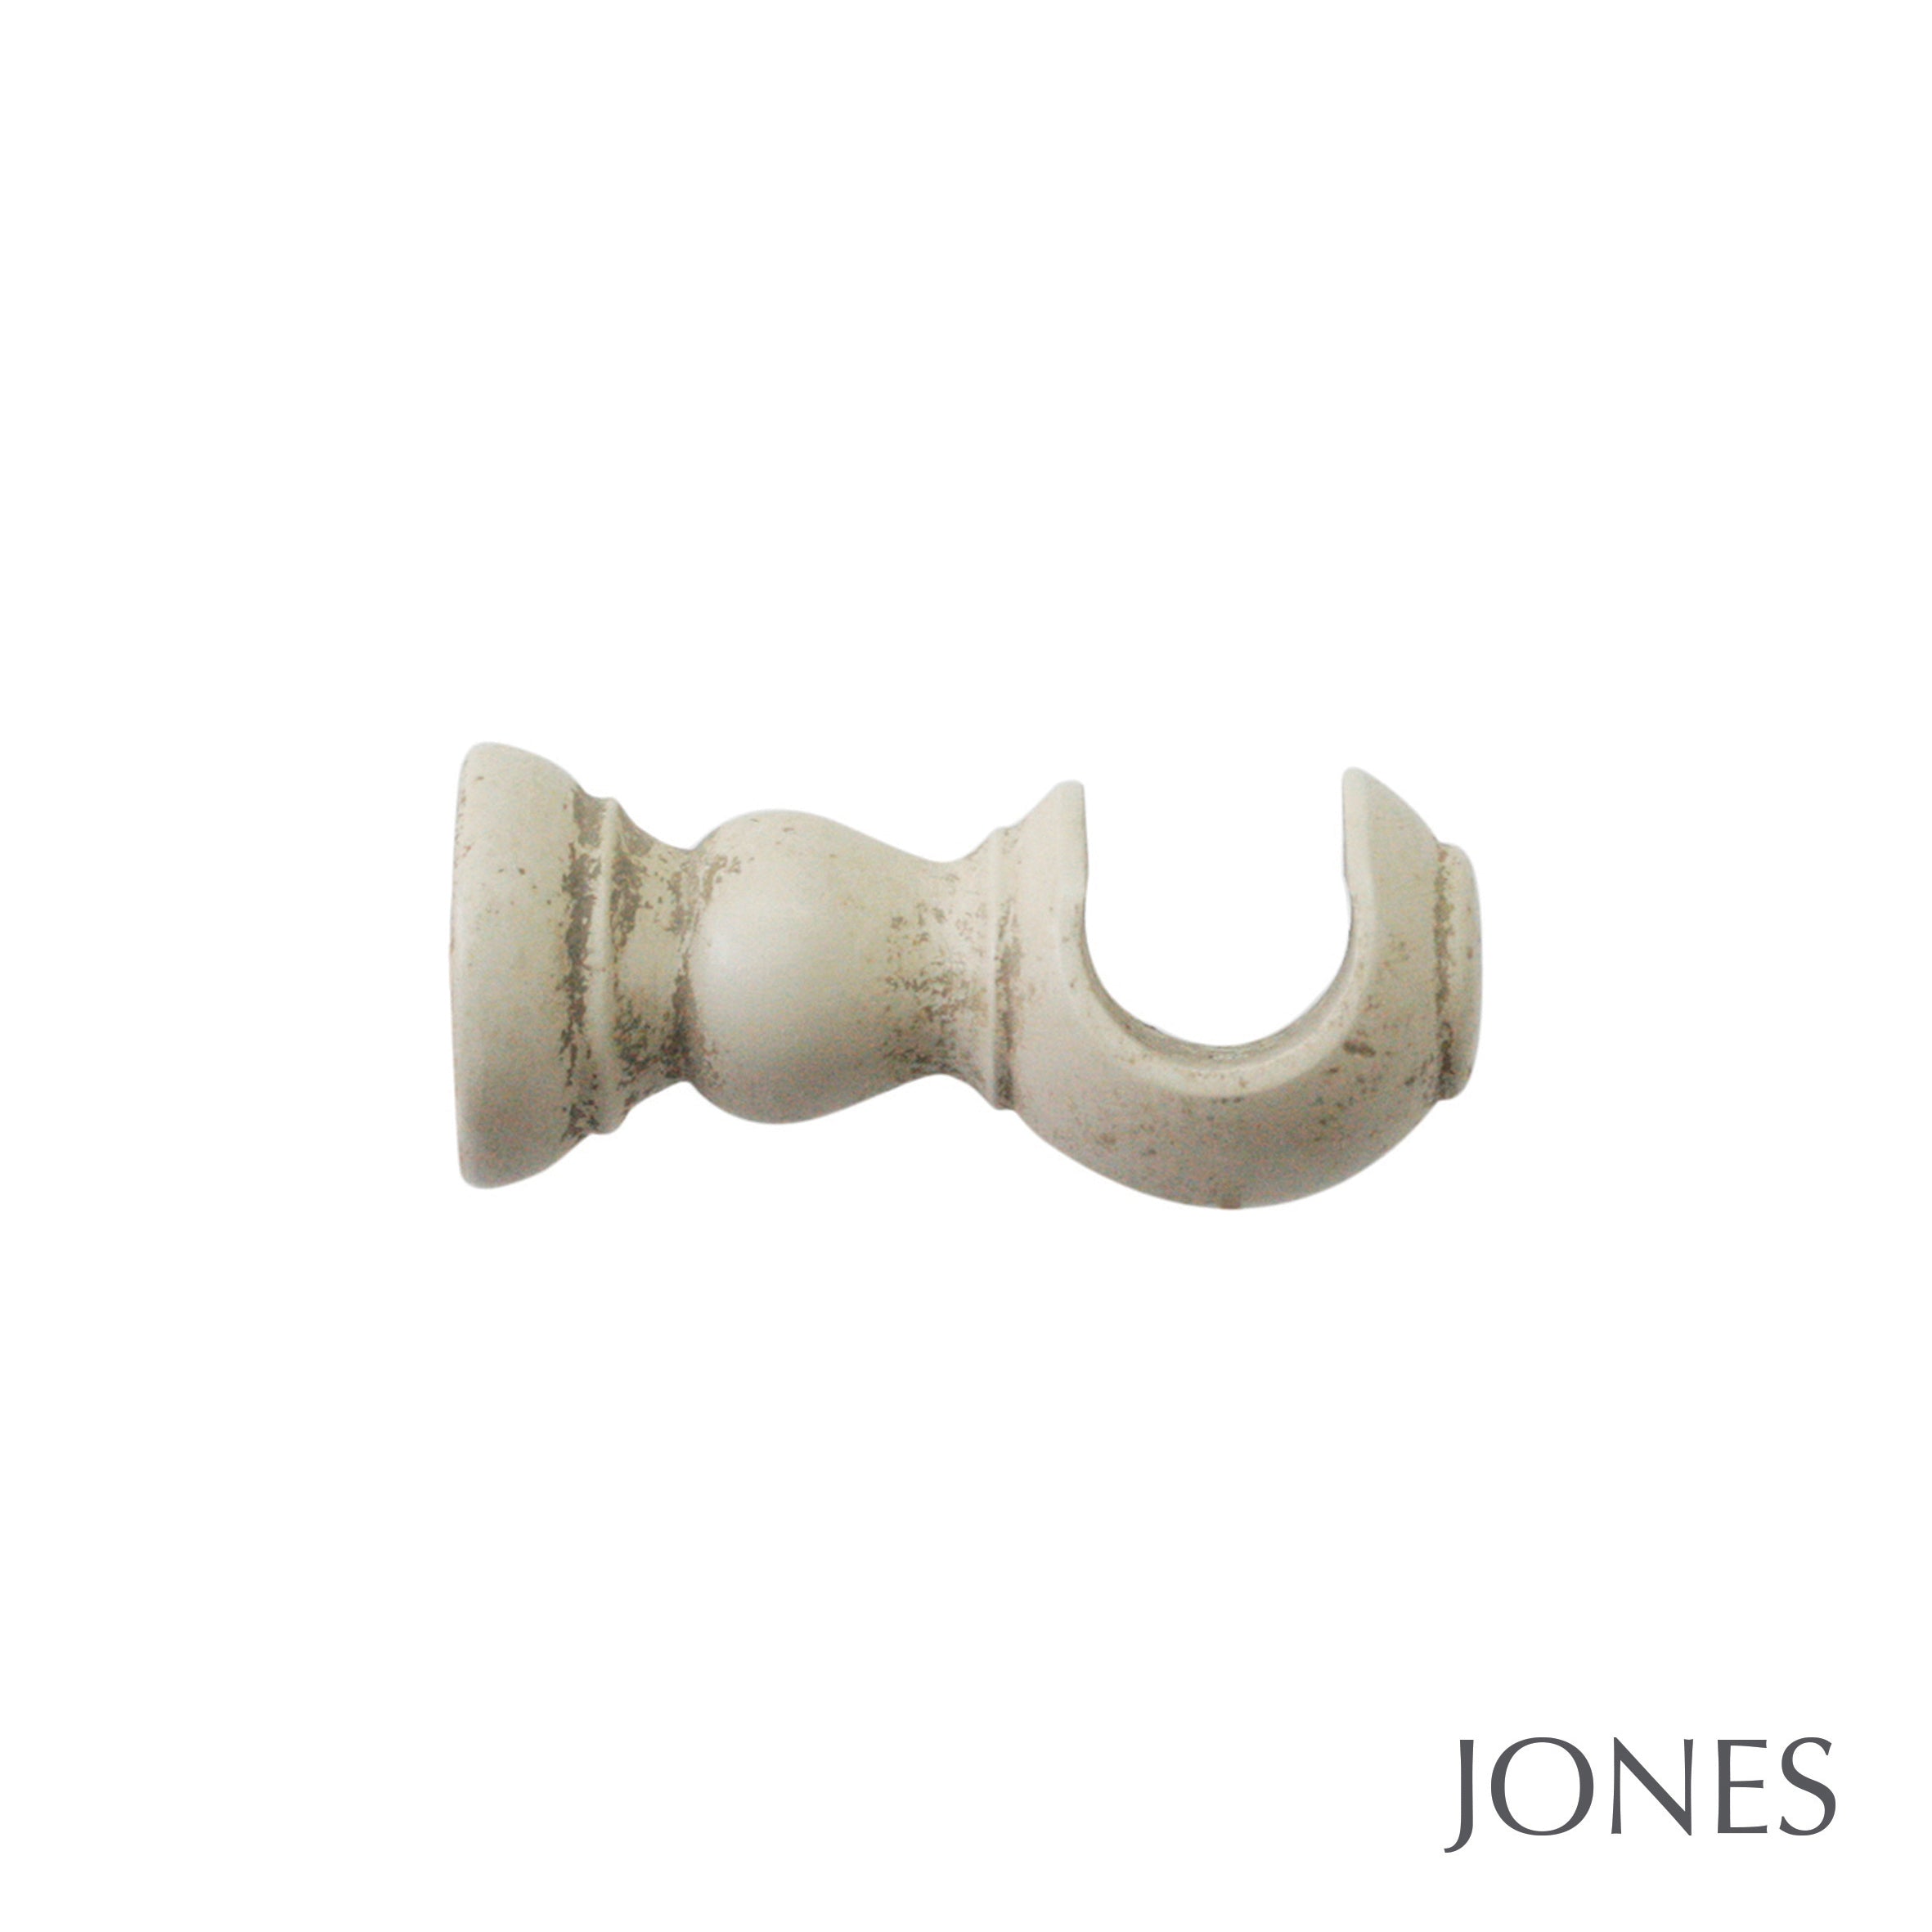 Jones Interiors Cathedral Wells Finial Curtain Pole Set in Putty